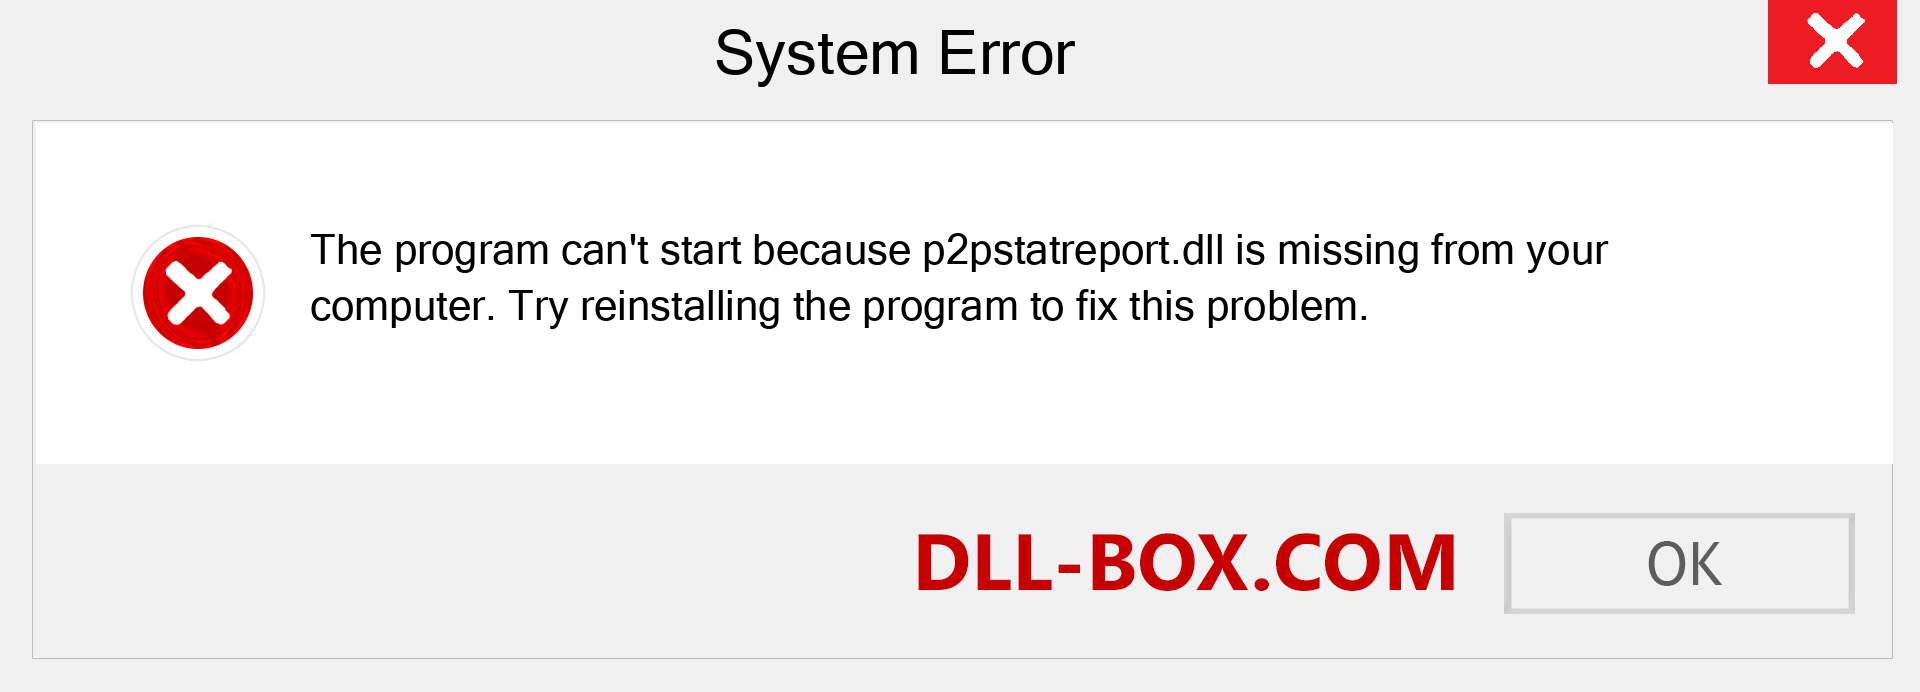  p2pstatreport.dll file is missing?. Download for Windows 7, 8, 10 - Fix  p2pstatreport dll Missing Error on Windows, photos, images